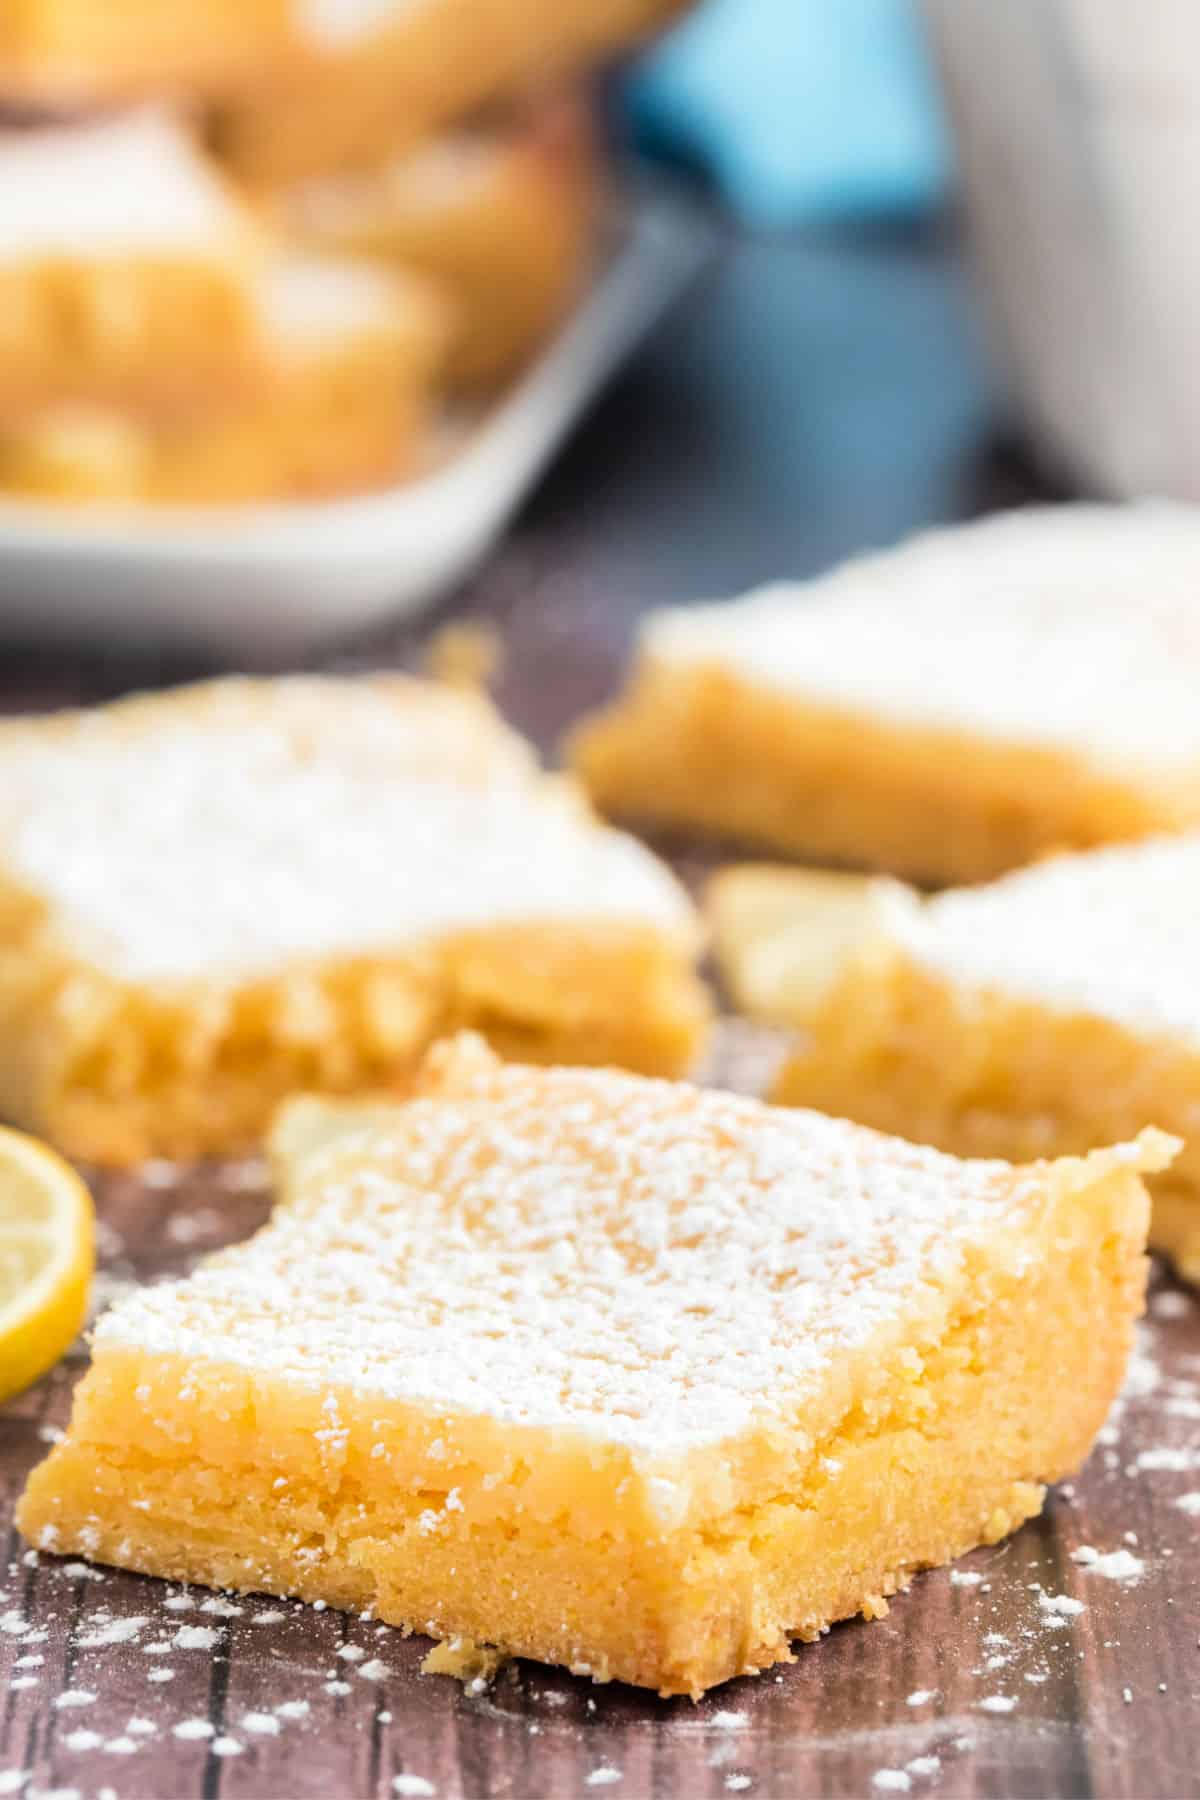 Lemon cake bars cut into squares and dusted with powdered sugar.